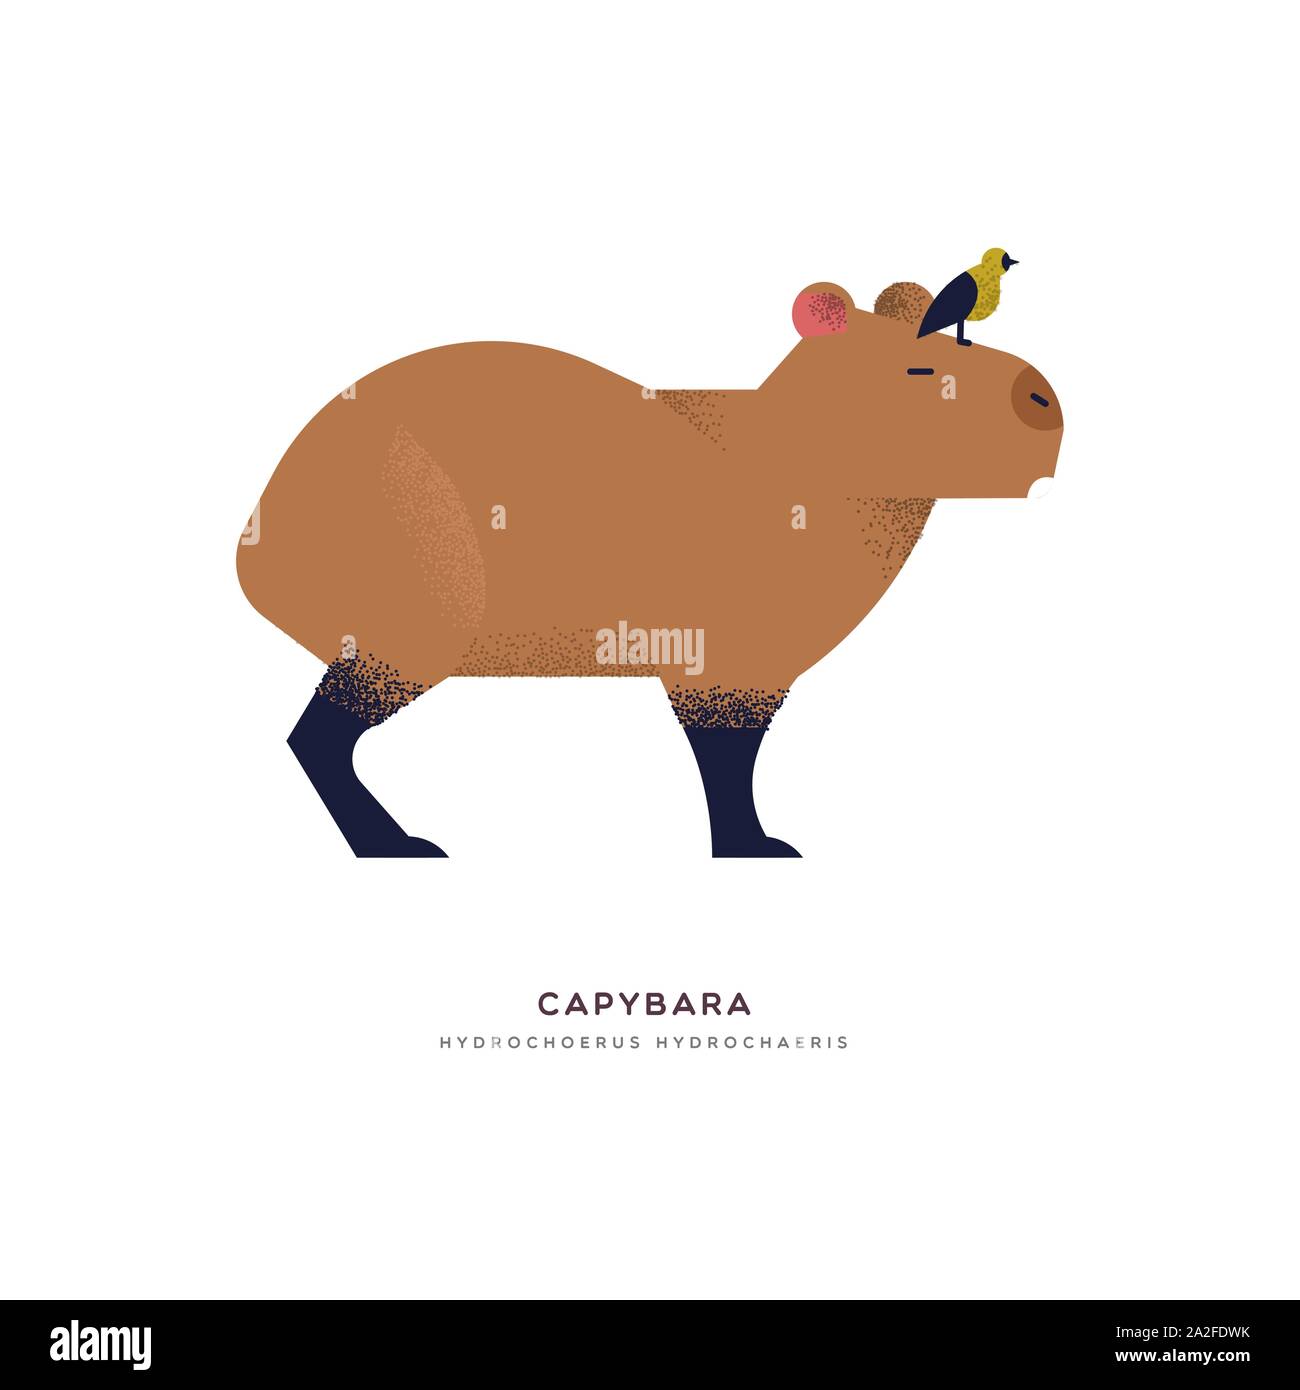 Capybara illustration on isolated white background, south america zoo animal concept. Educational wildlife design with fauna species name label. Stock Vector